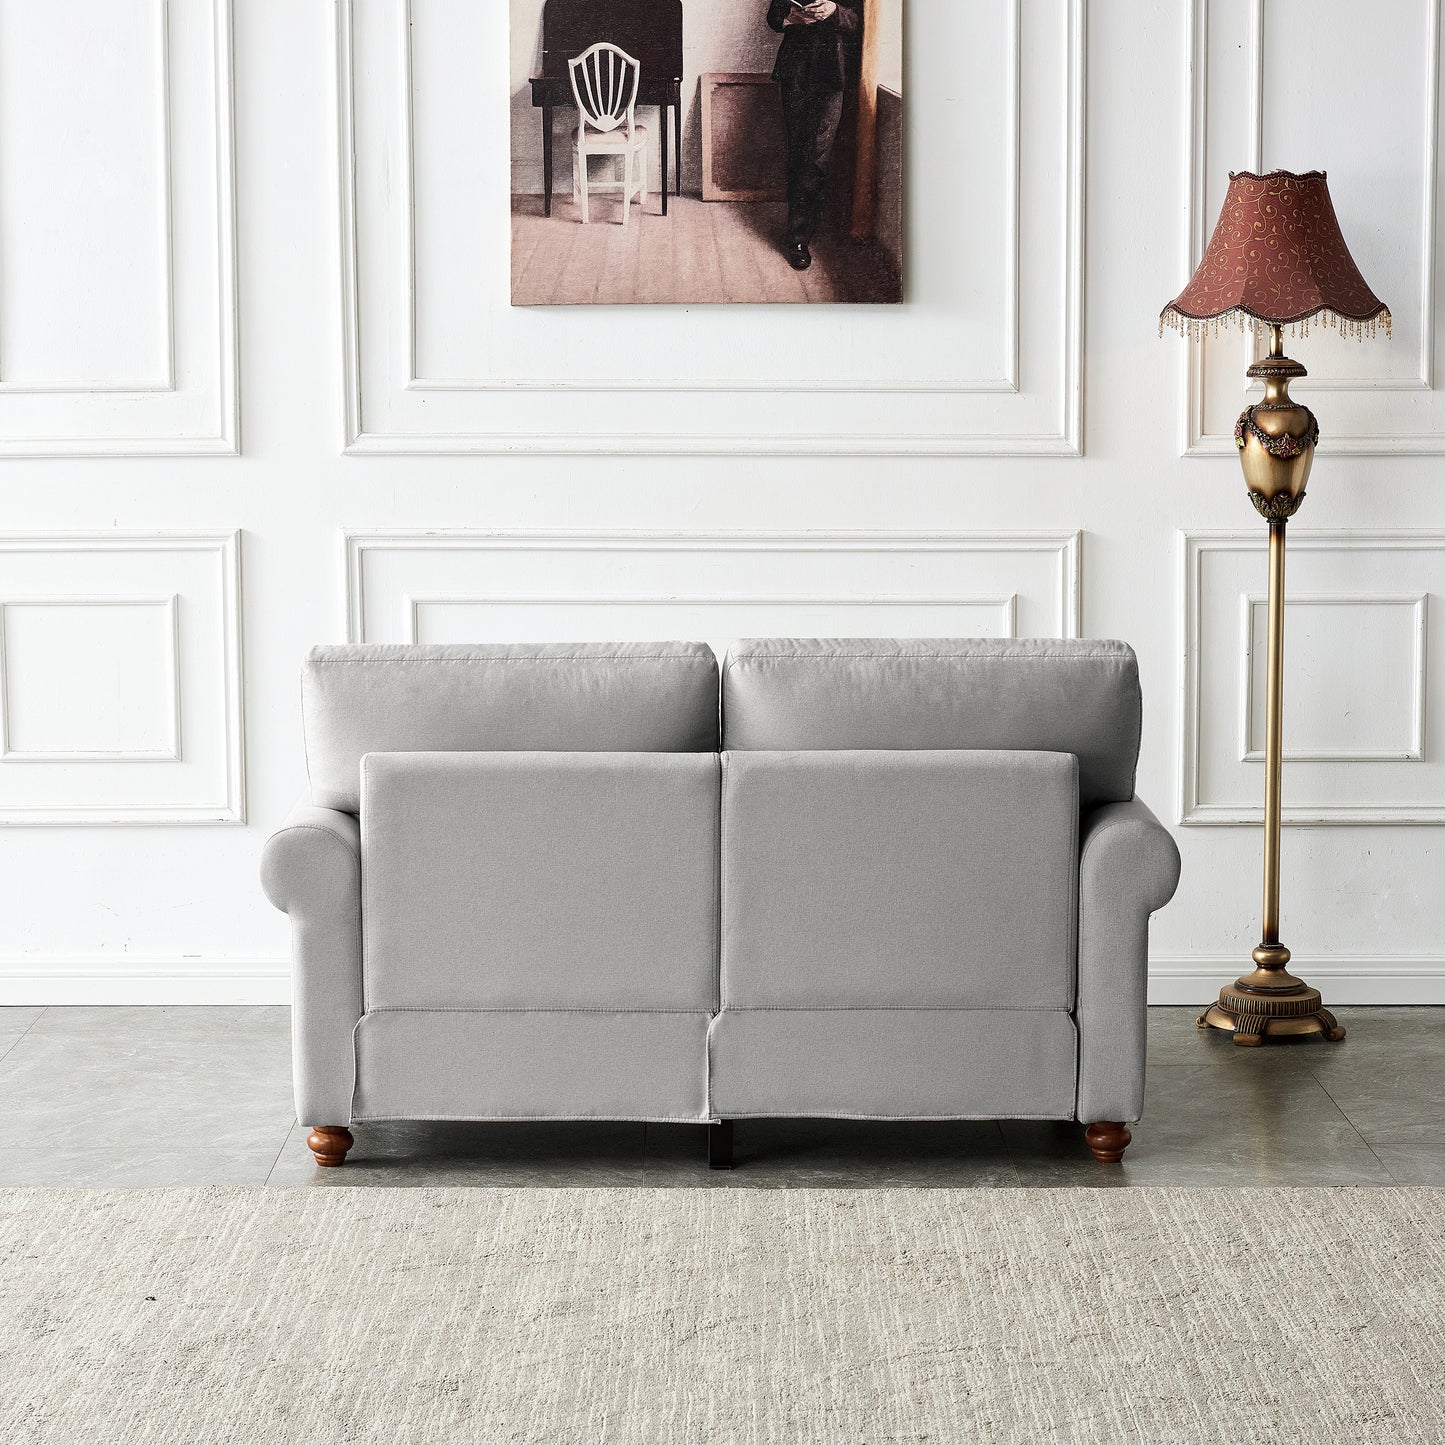 Dark Gray Upholstered Loveseat with Silver Nail Head Trim, Wood Legs